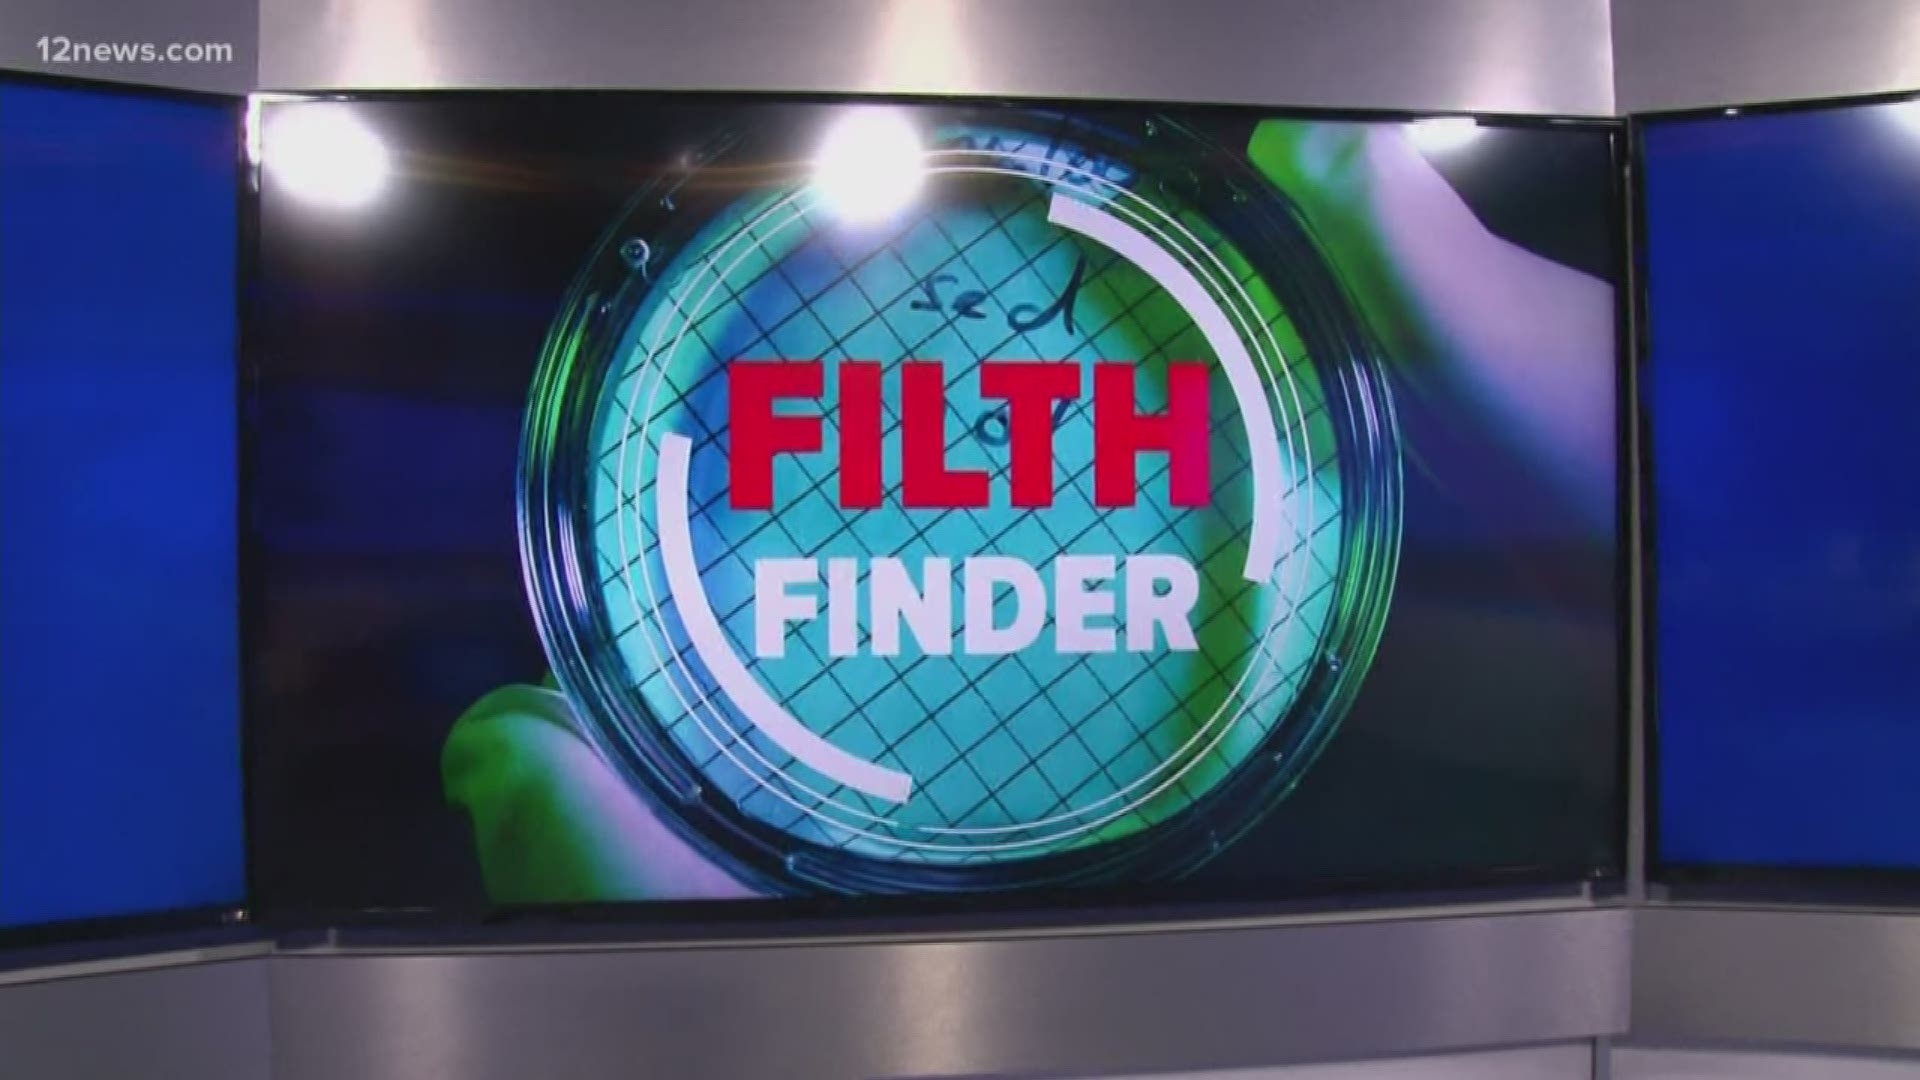 We tested purses, backpacks and handbags to see what germs people carry around with them. The Filth Finder counts living things. A score under 30 is pretty clean